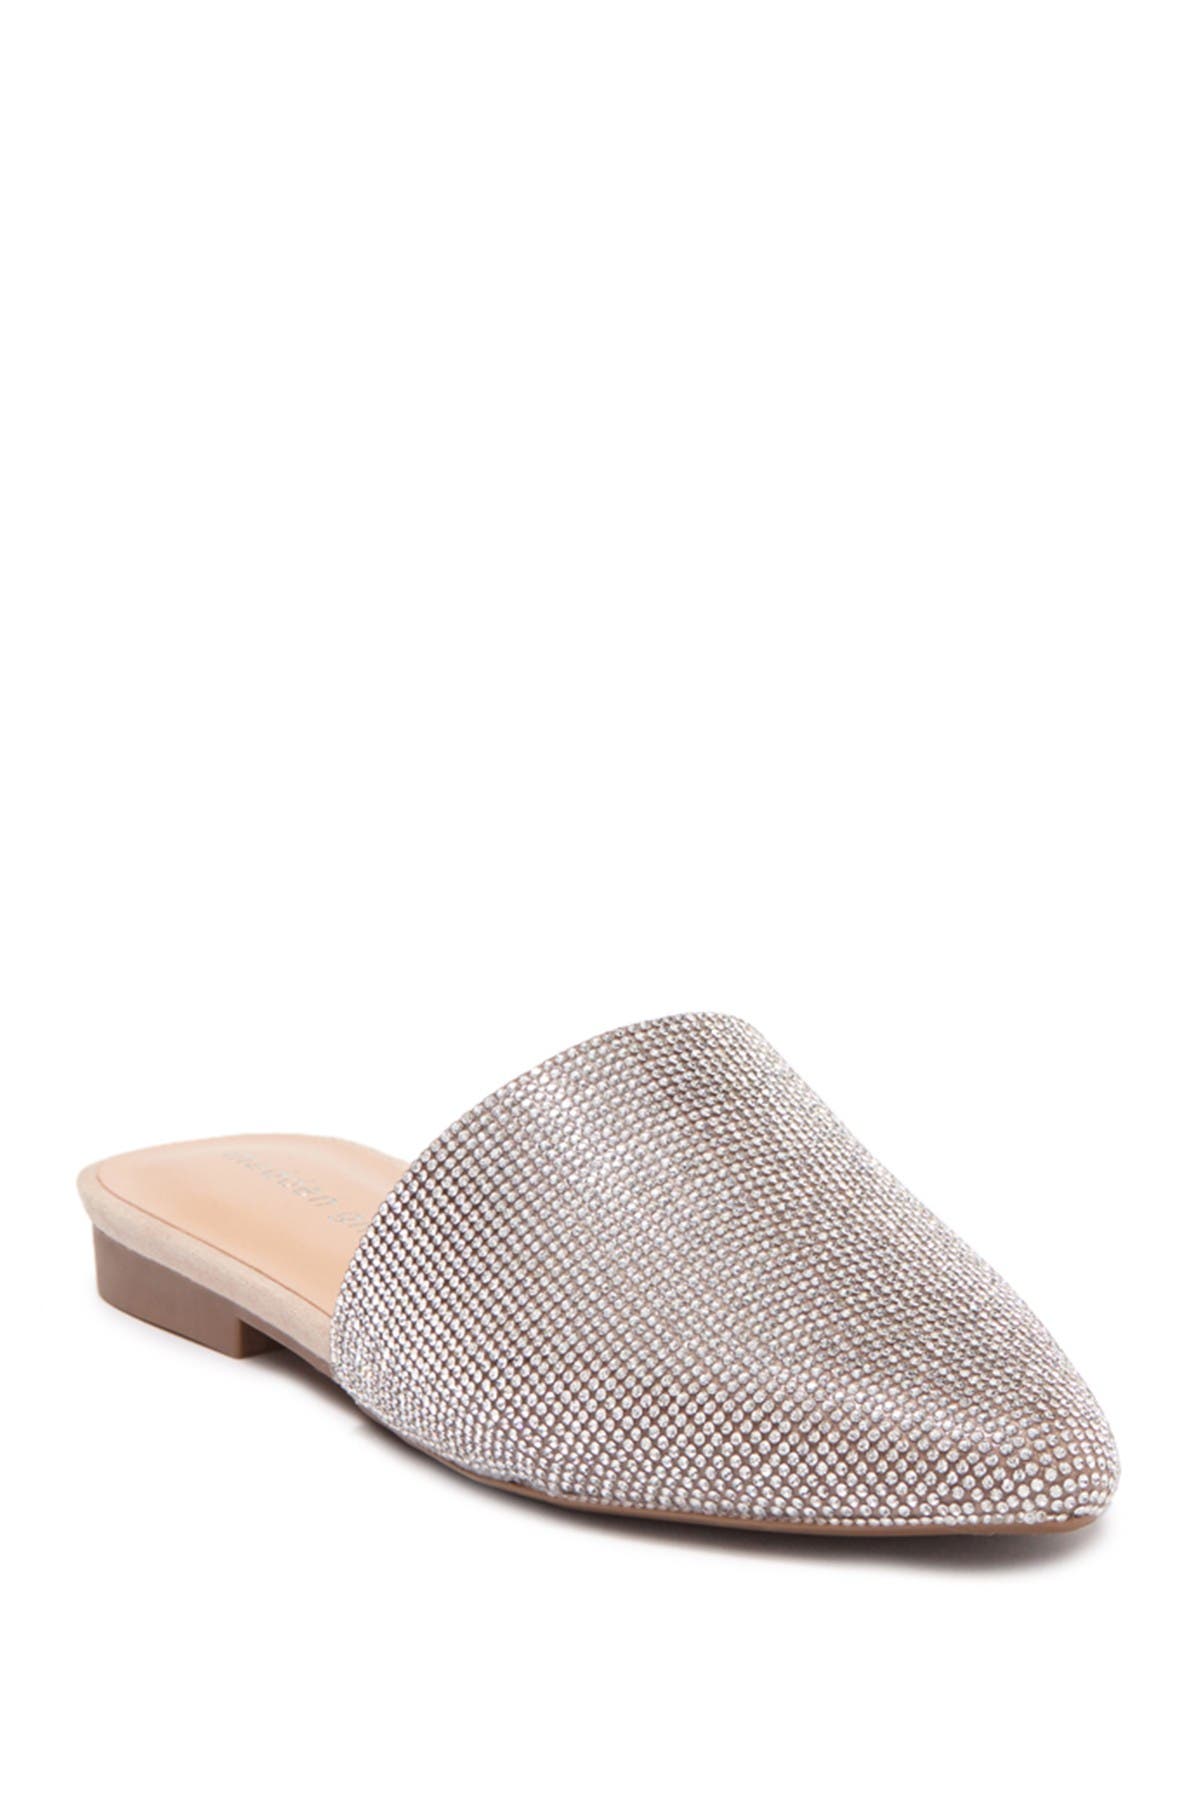 madden girl pointed flats